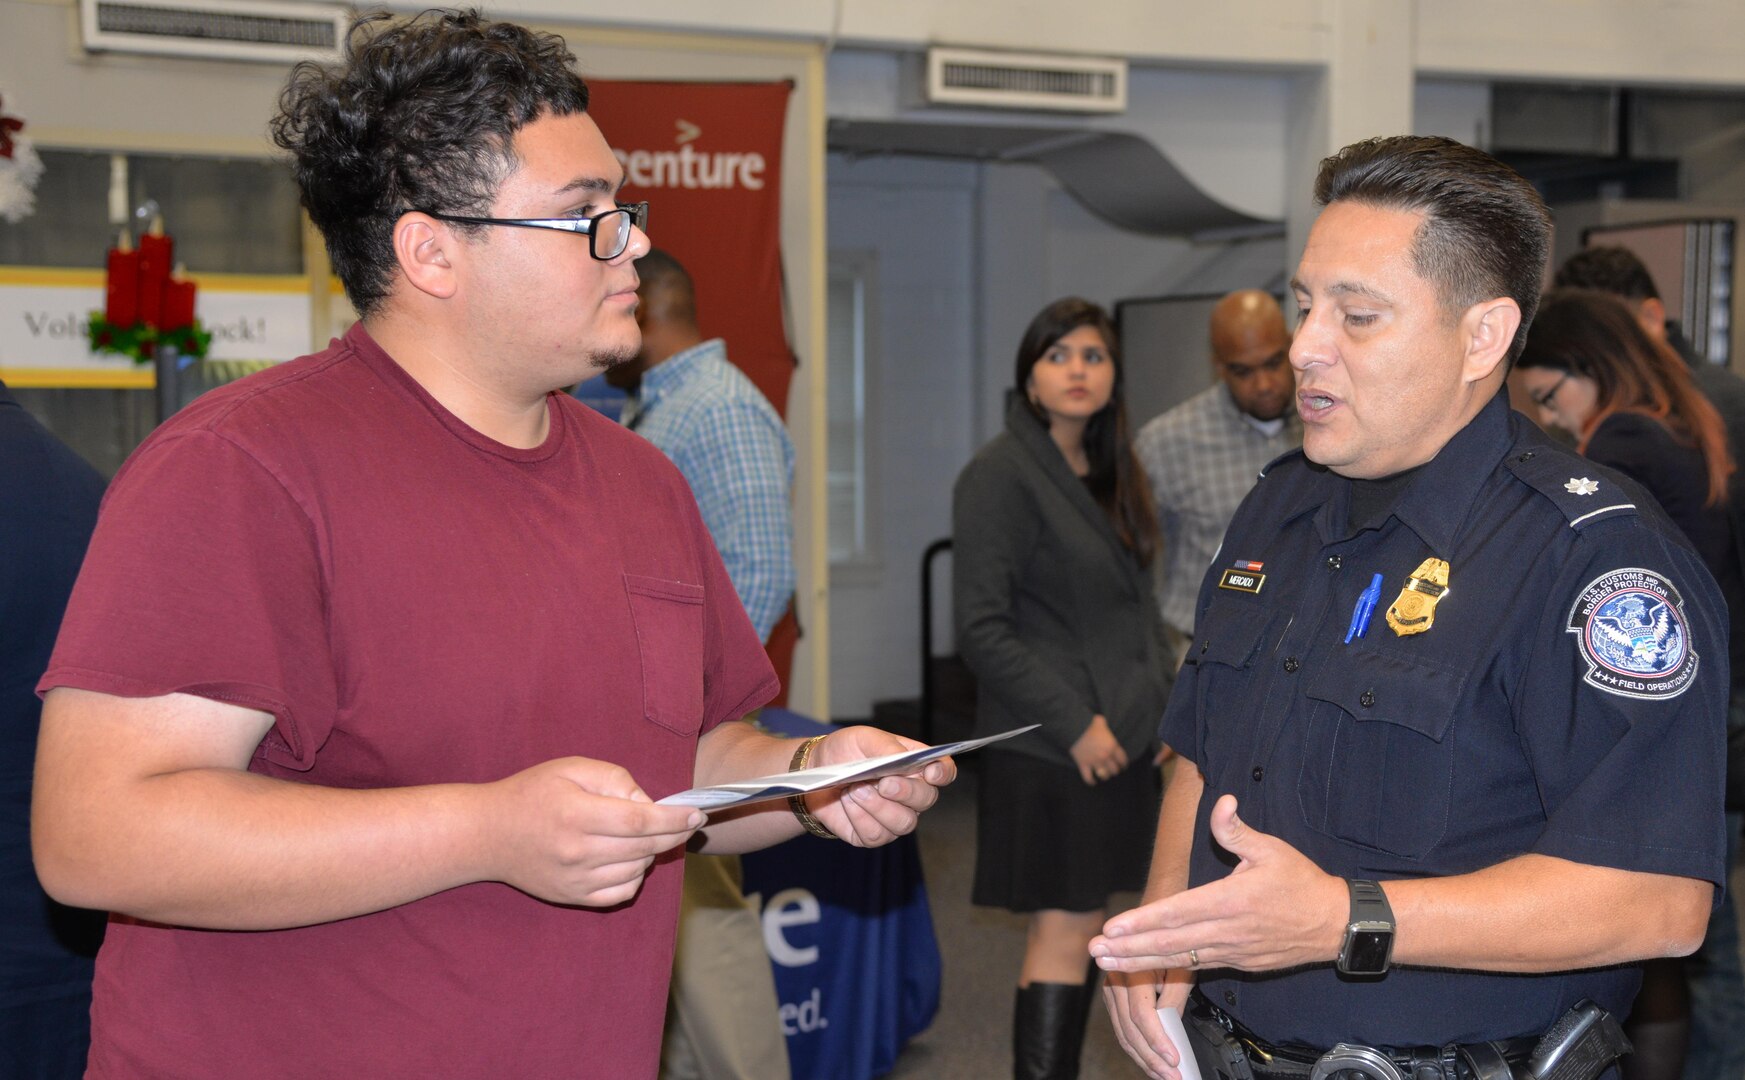 Supervisor Daniel Mercado (right), U.S. Customs and Border Protection field operations, talks to Joshua Martinez (left) about employment opportunities as a customs agent at the Hiring Our Heroes event  at the Joint Base San Antonio-Fort Sam Houston Military & Family Readiness Center Friday.